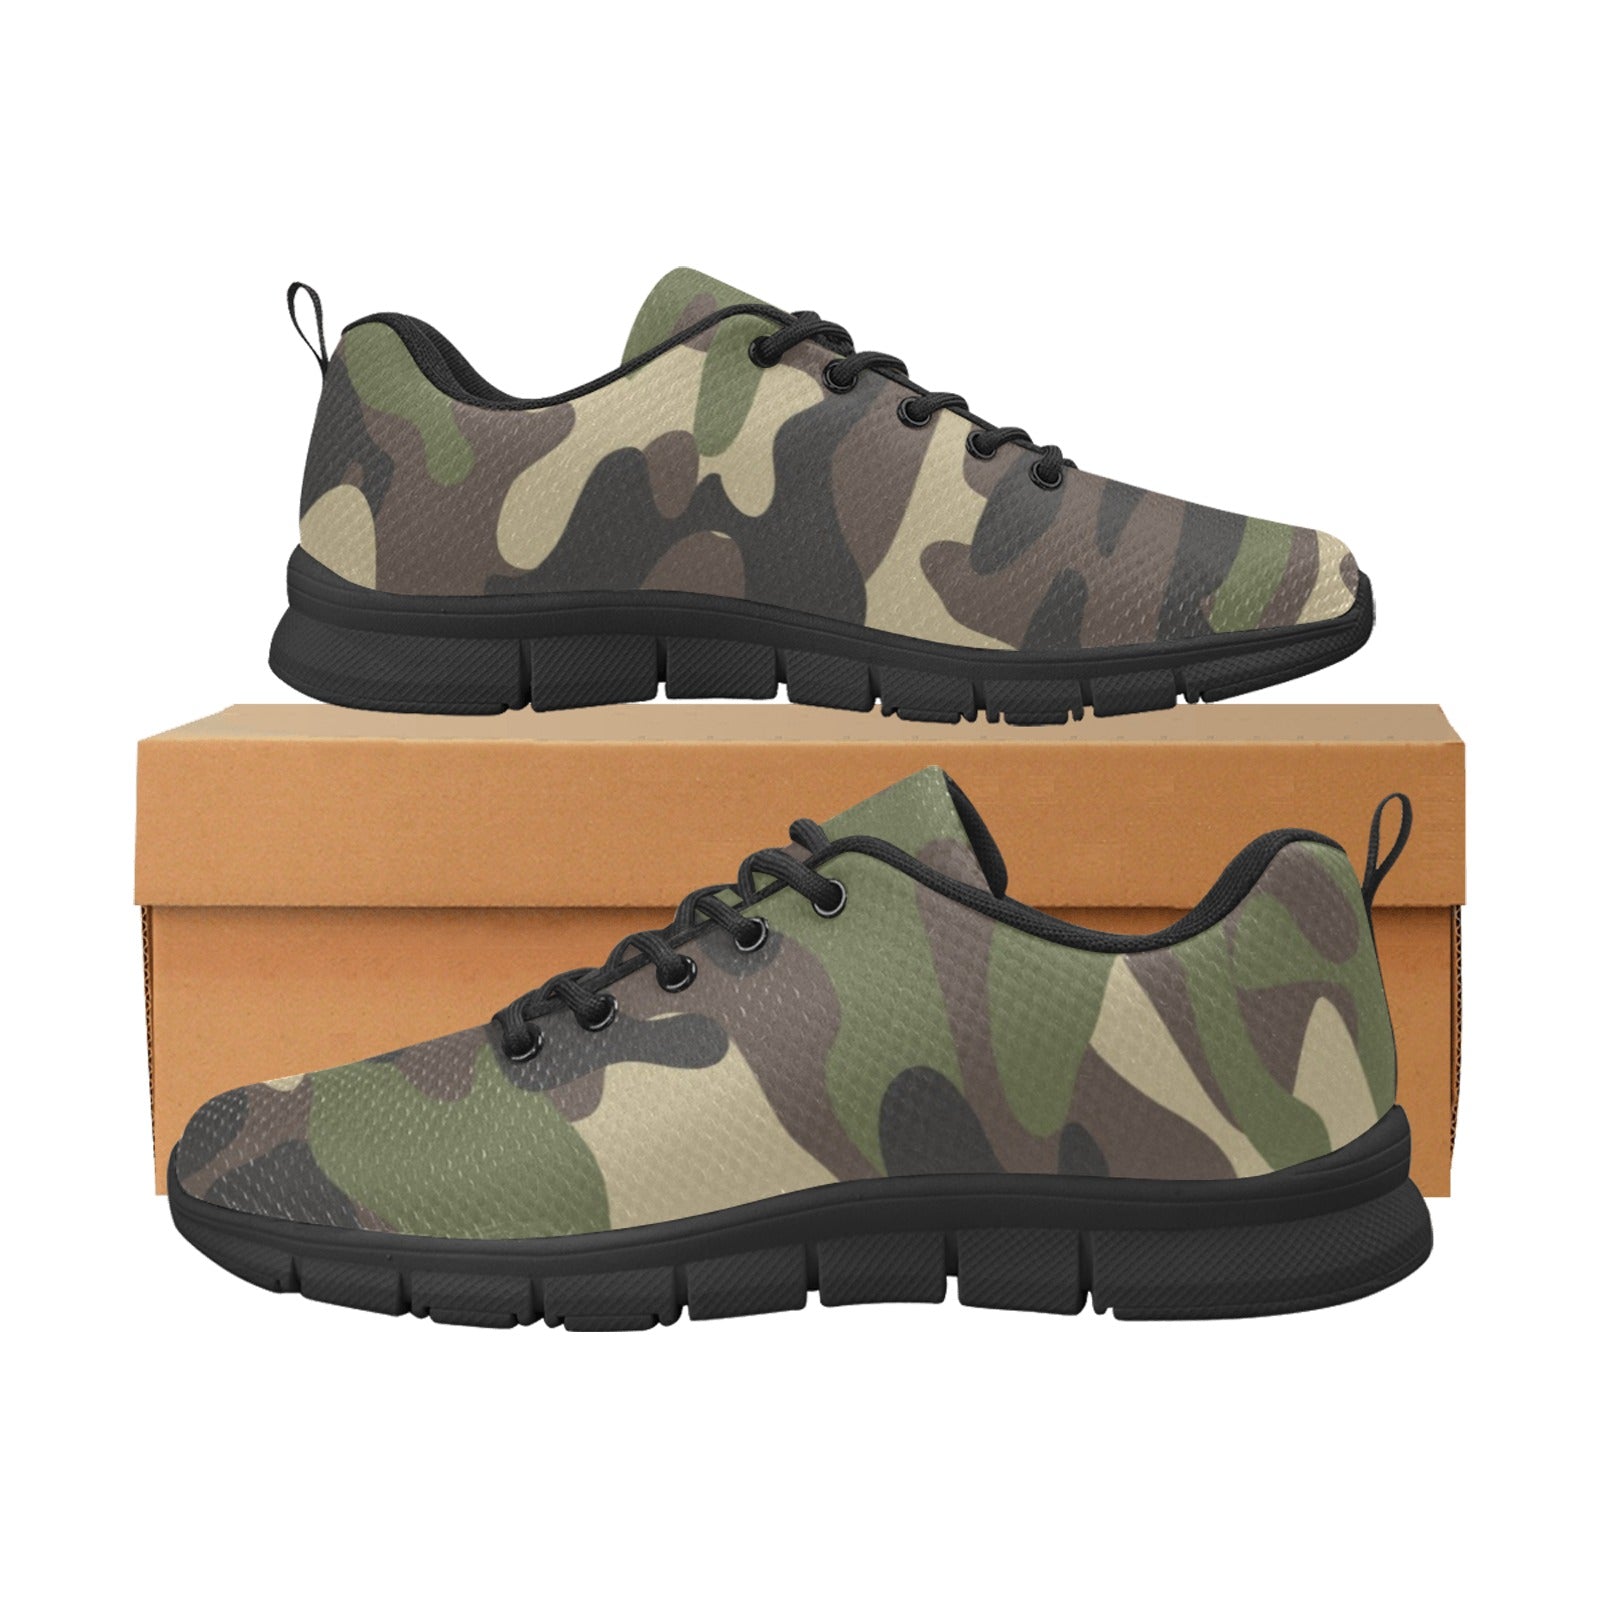 Camo Men Breathable Sneakers, Mesh Green Camouflage Print Lace Up Running Custom Designer Casual Festival Shoes Trainers Streetwear Starcove Fashion